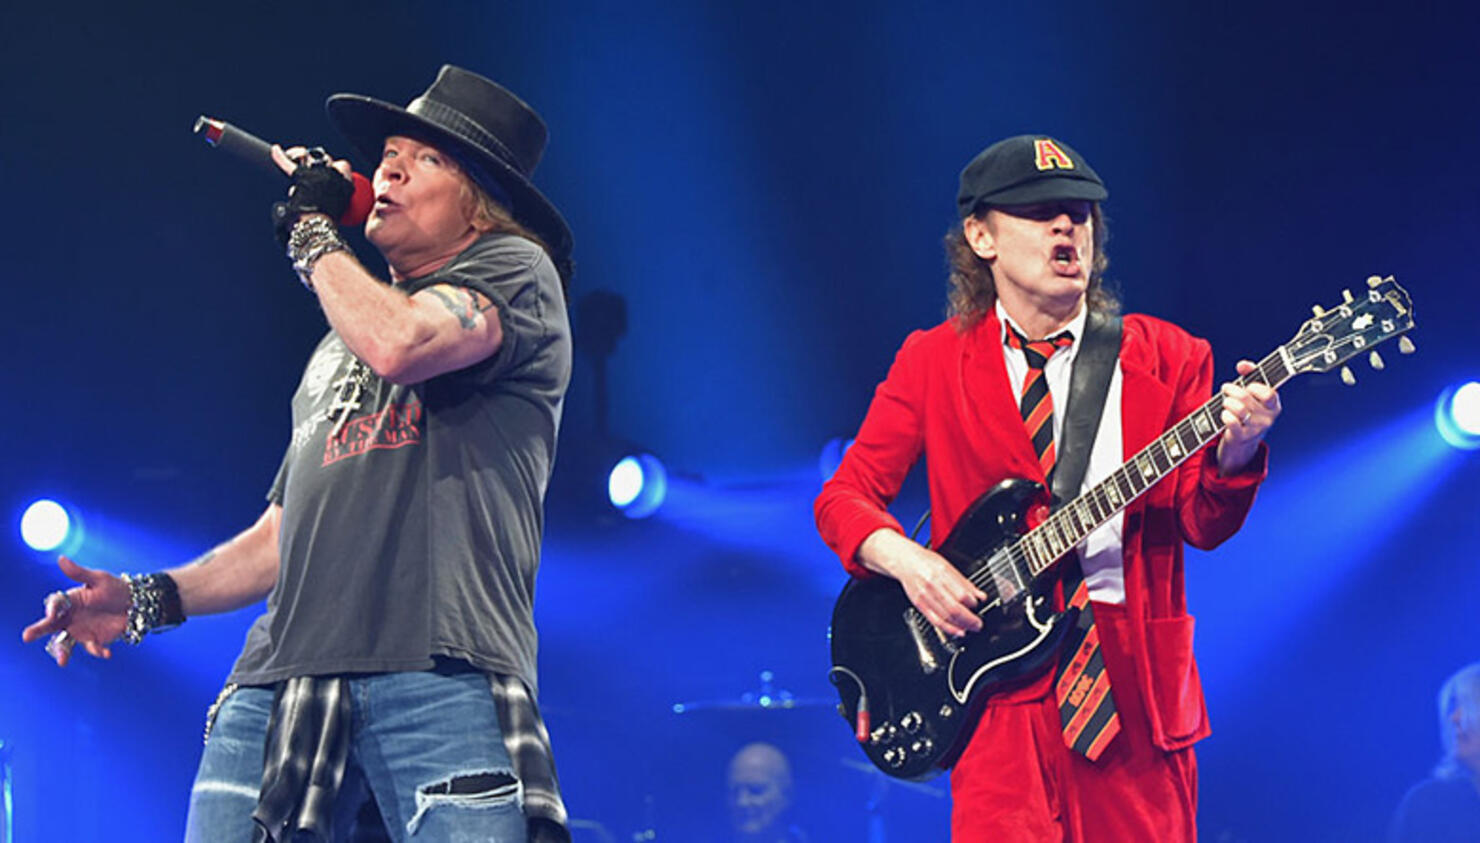 Guns N' Roses Manager Shares Photo of AC/DC Document